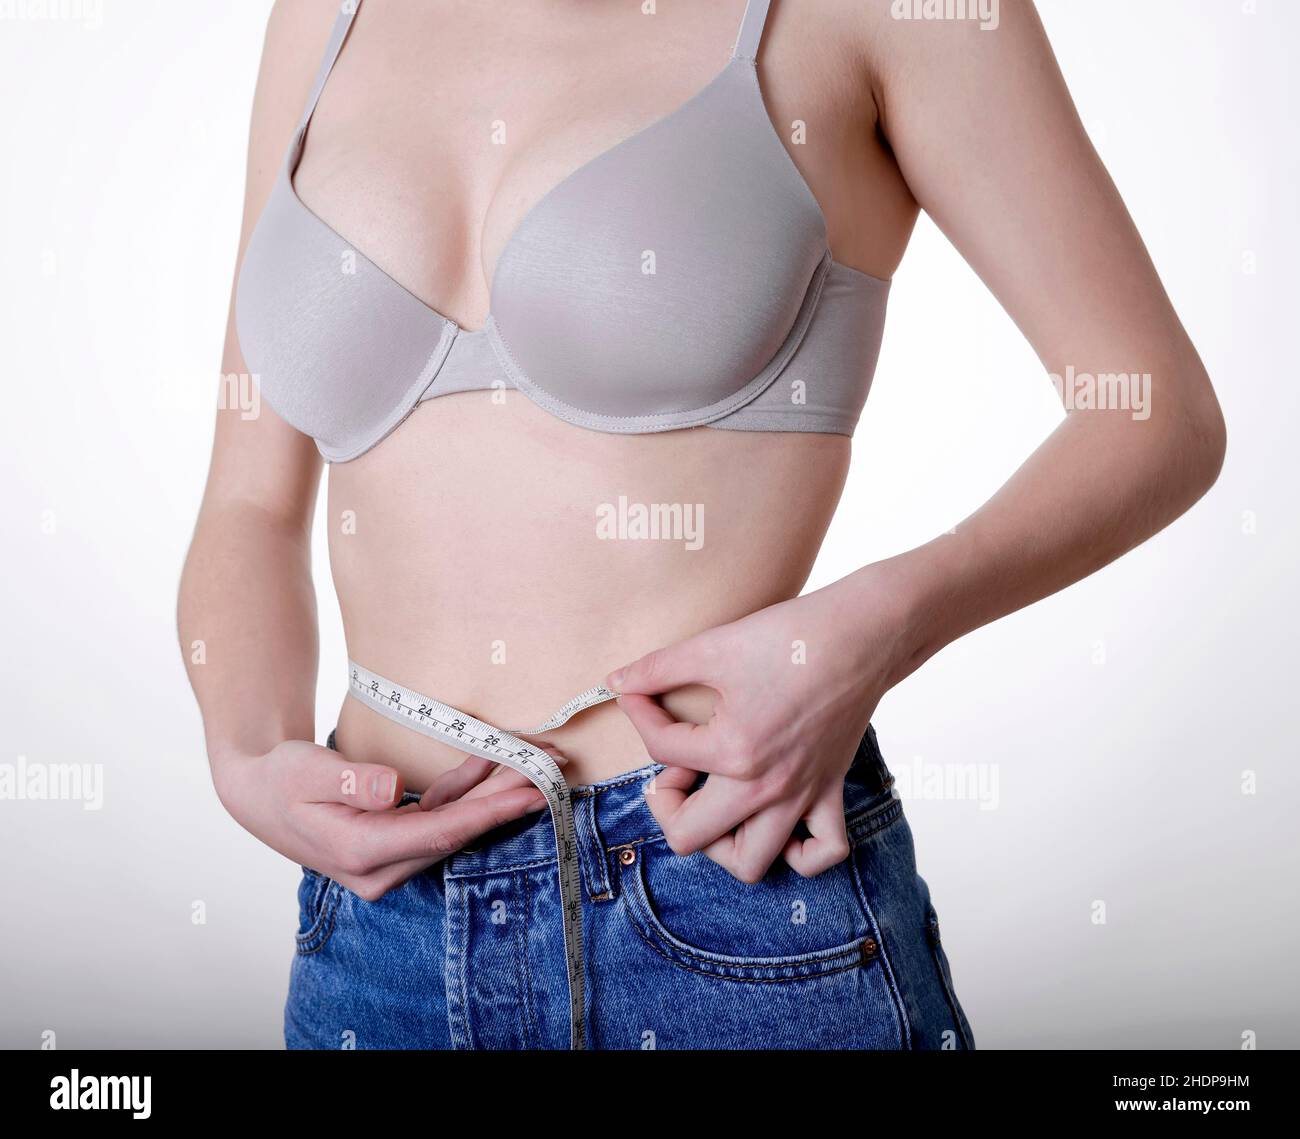 Female With Breast Size D Lateral View Stock Photo, Picture and Royalty  Free Image. Image 16586753.